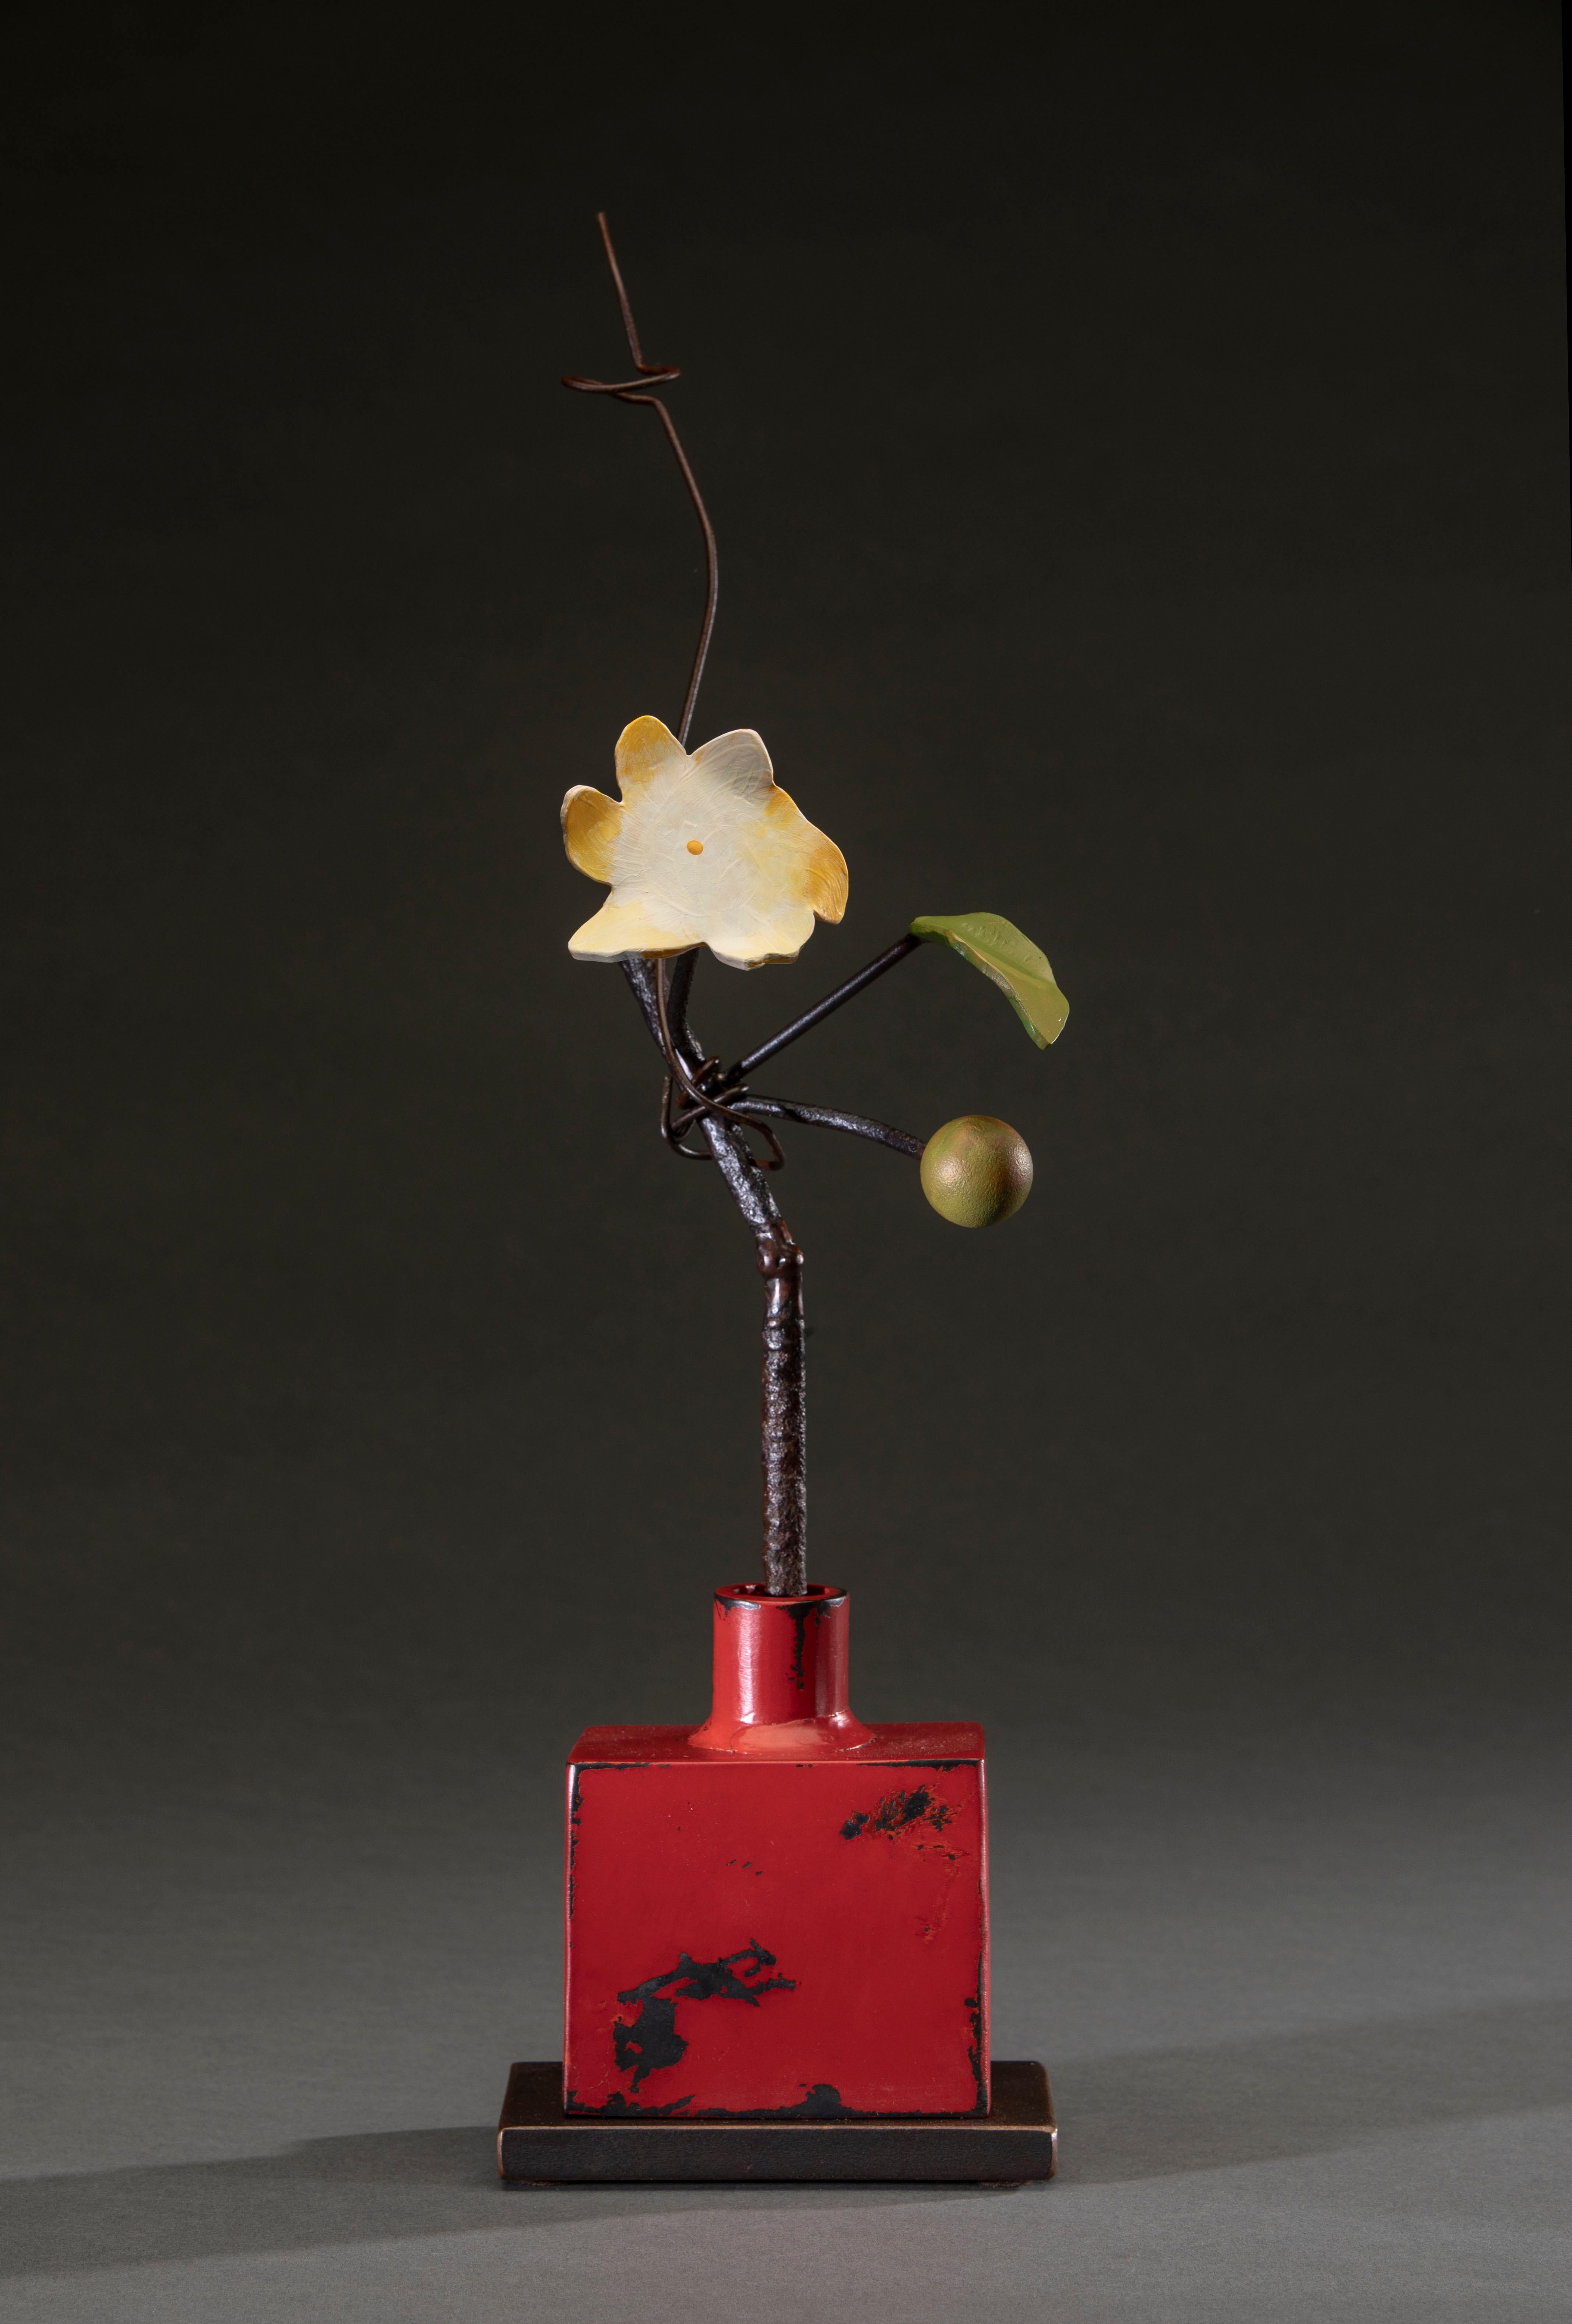 Bronze and Steel Sculpture by David Kimball Anderson 'Red Bottle Yellow Flower' 1